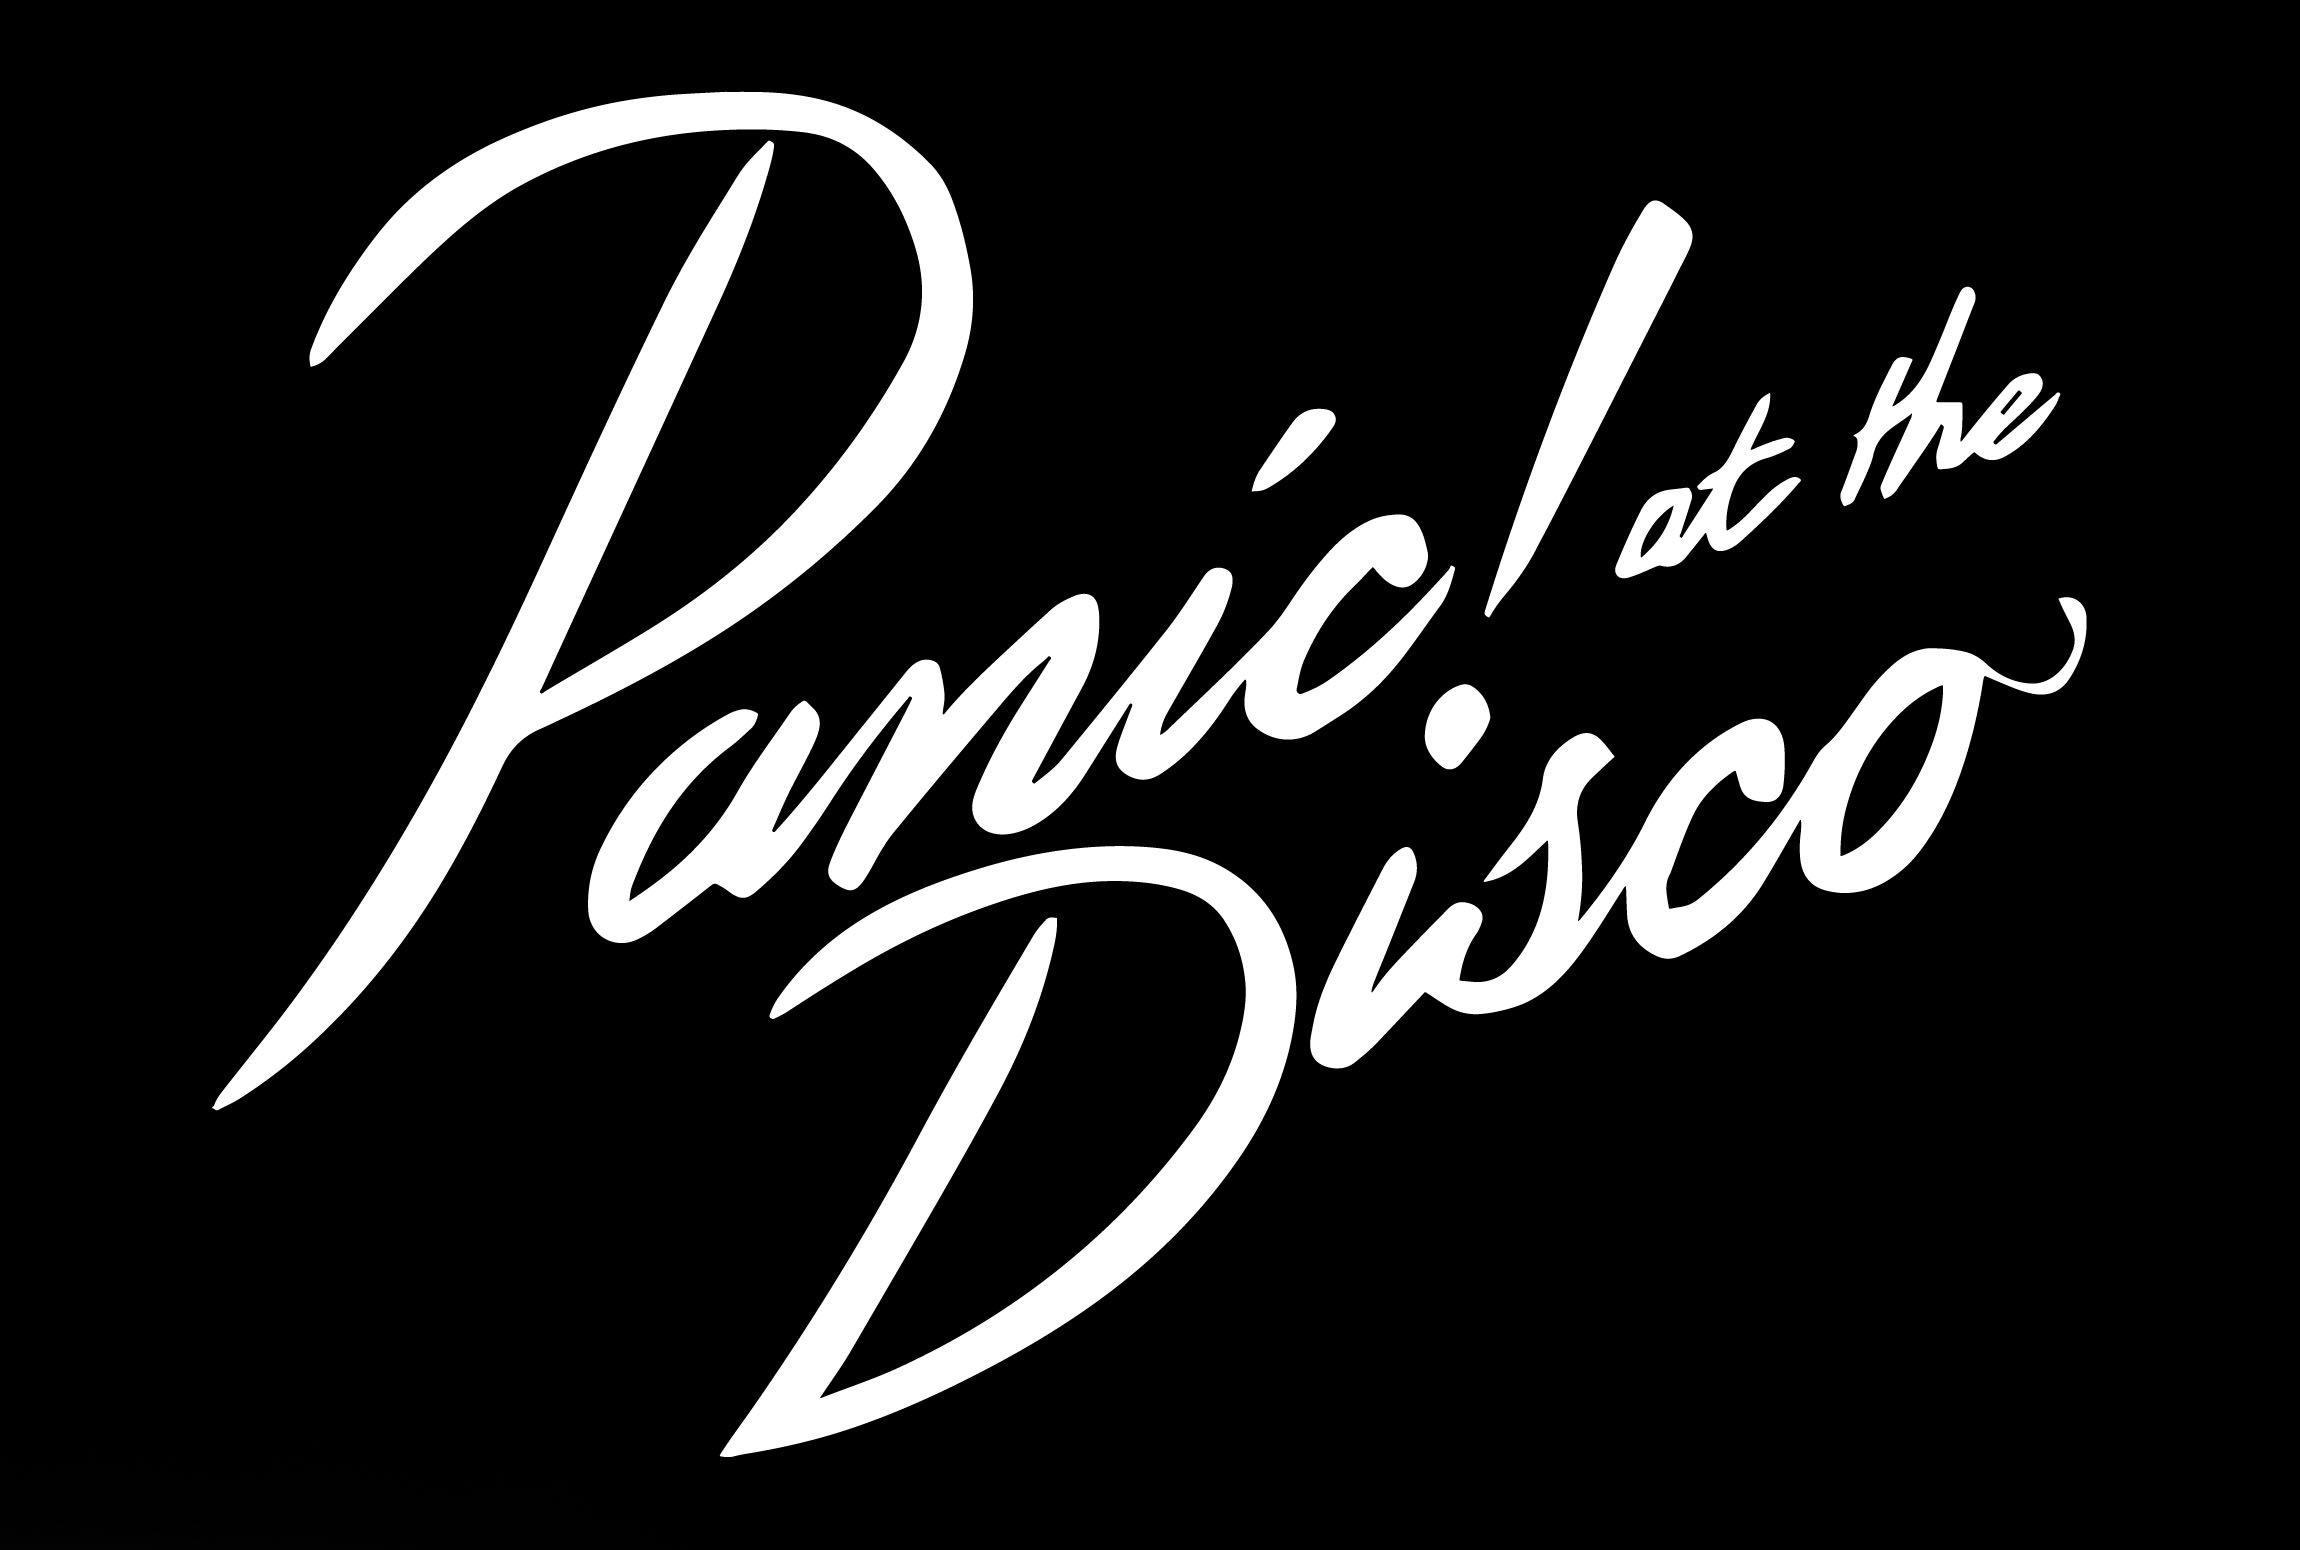 Panic at the Disco Logo - Panic at the Disco Logo, symbol meaning, History and Evolution